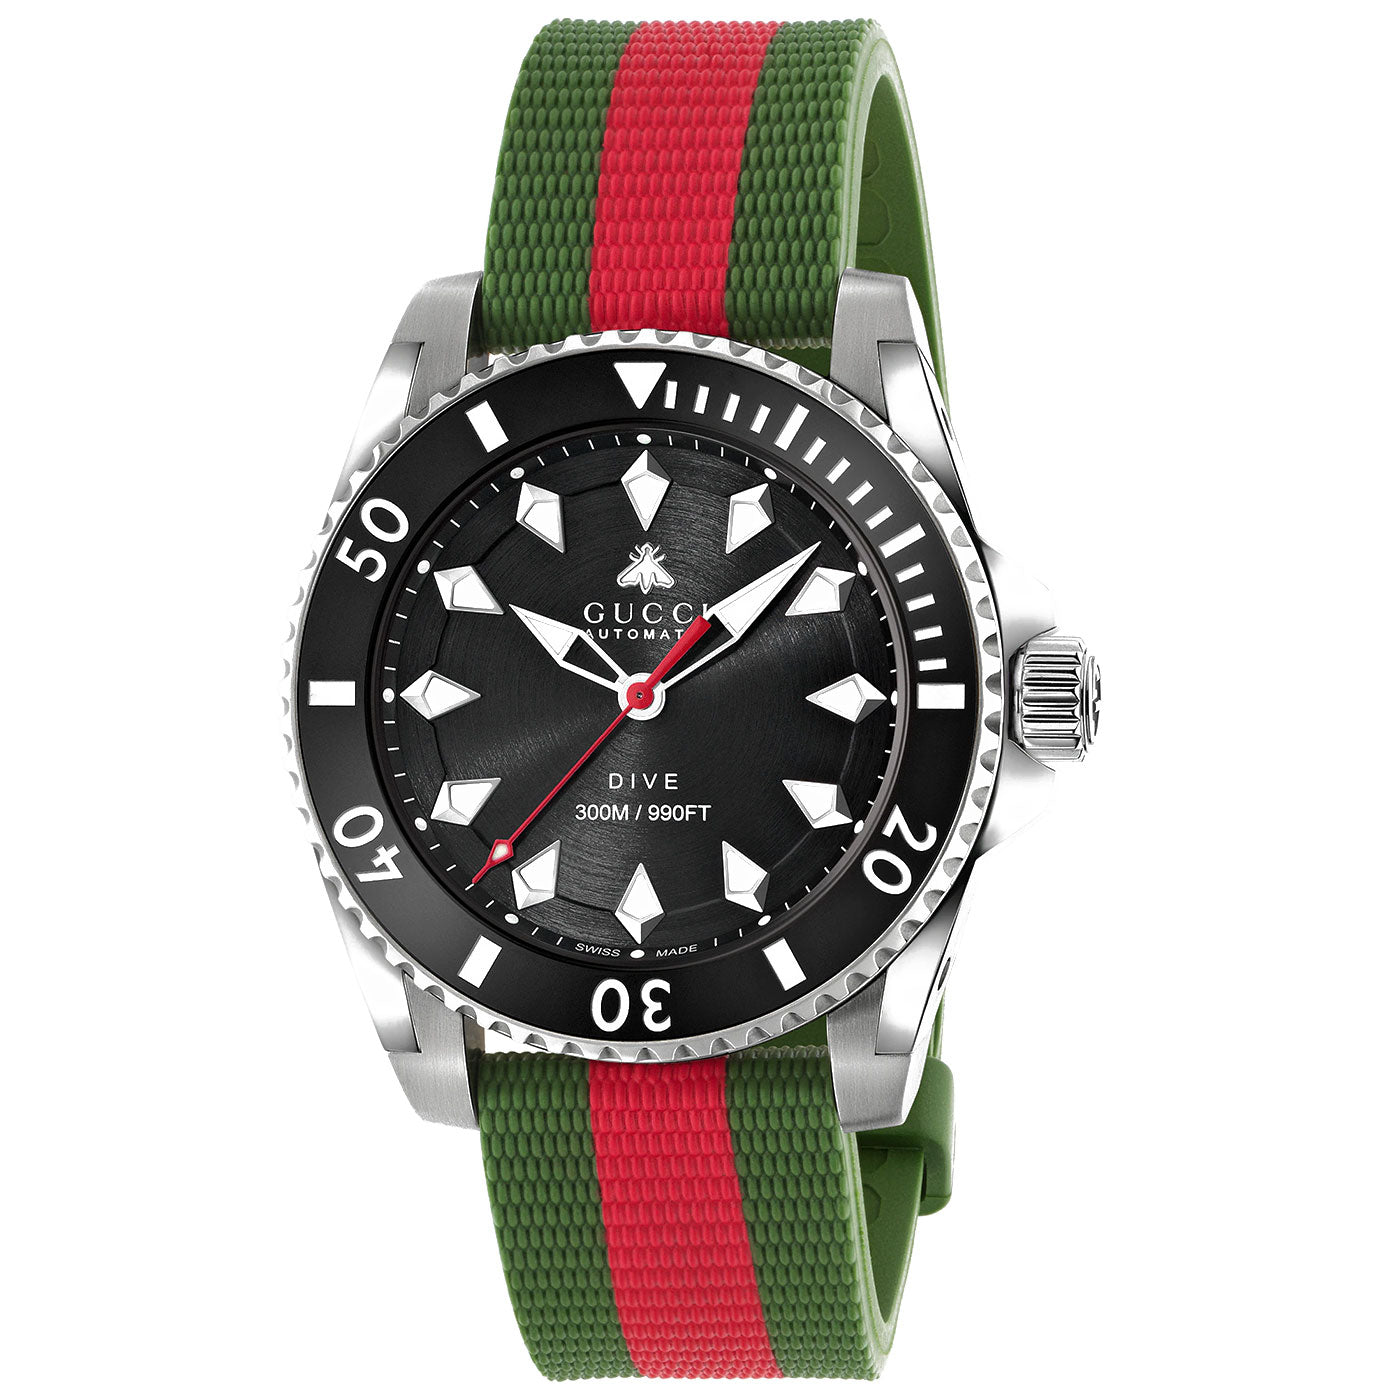 Gucci Dive Automatic 45mm Watch